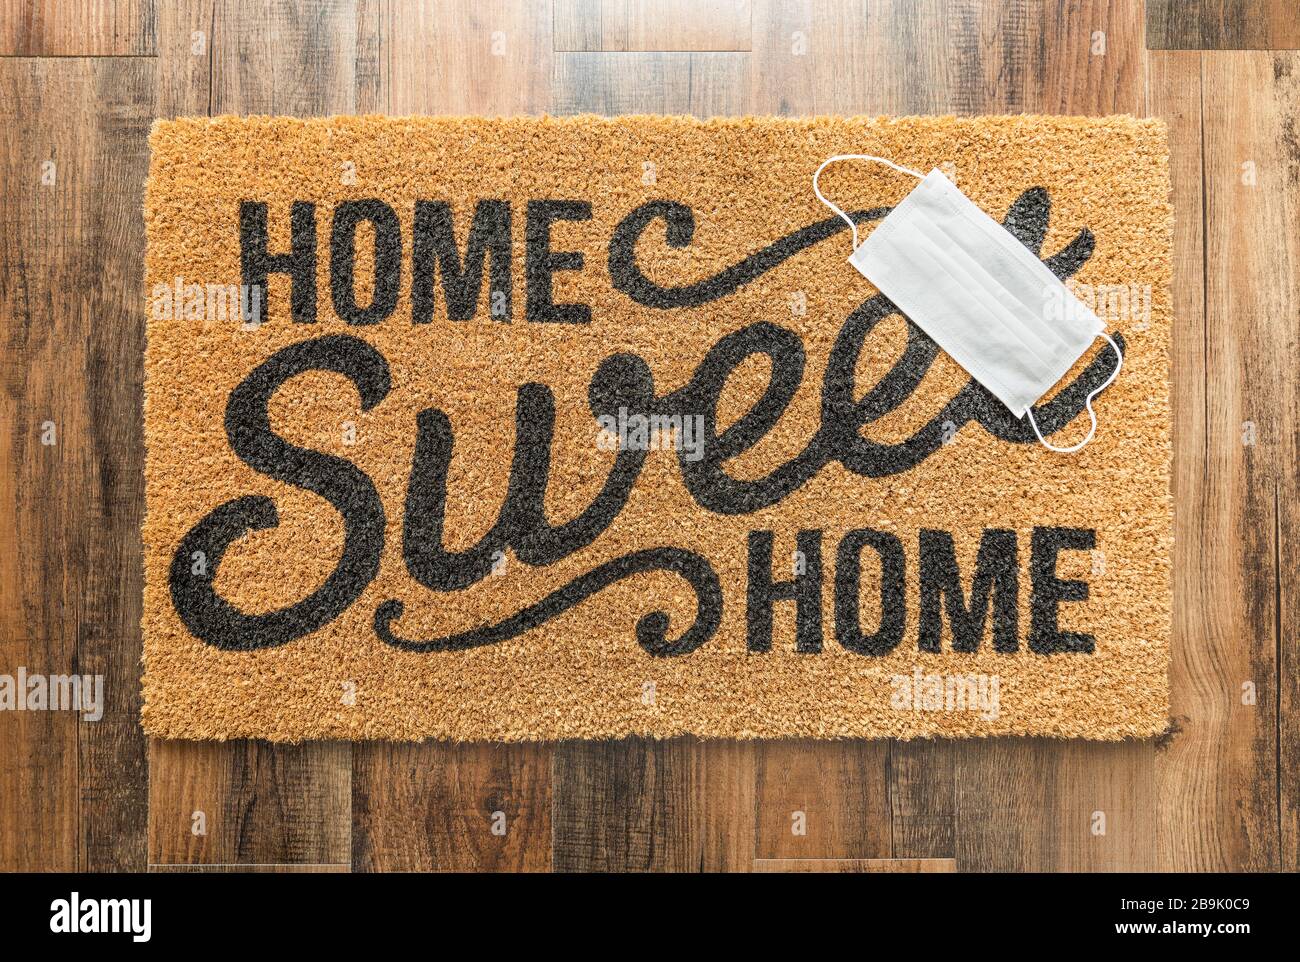 One Medical Face Mask Rests on Home Sweet Home Welcome Mat Amidst The Coronavirus Pandemic. Stock Photo